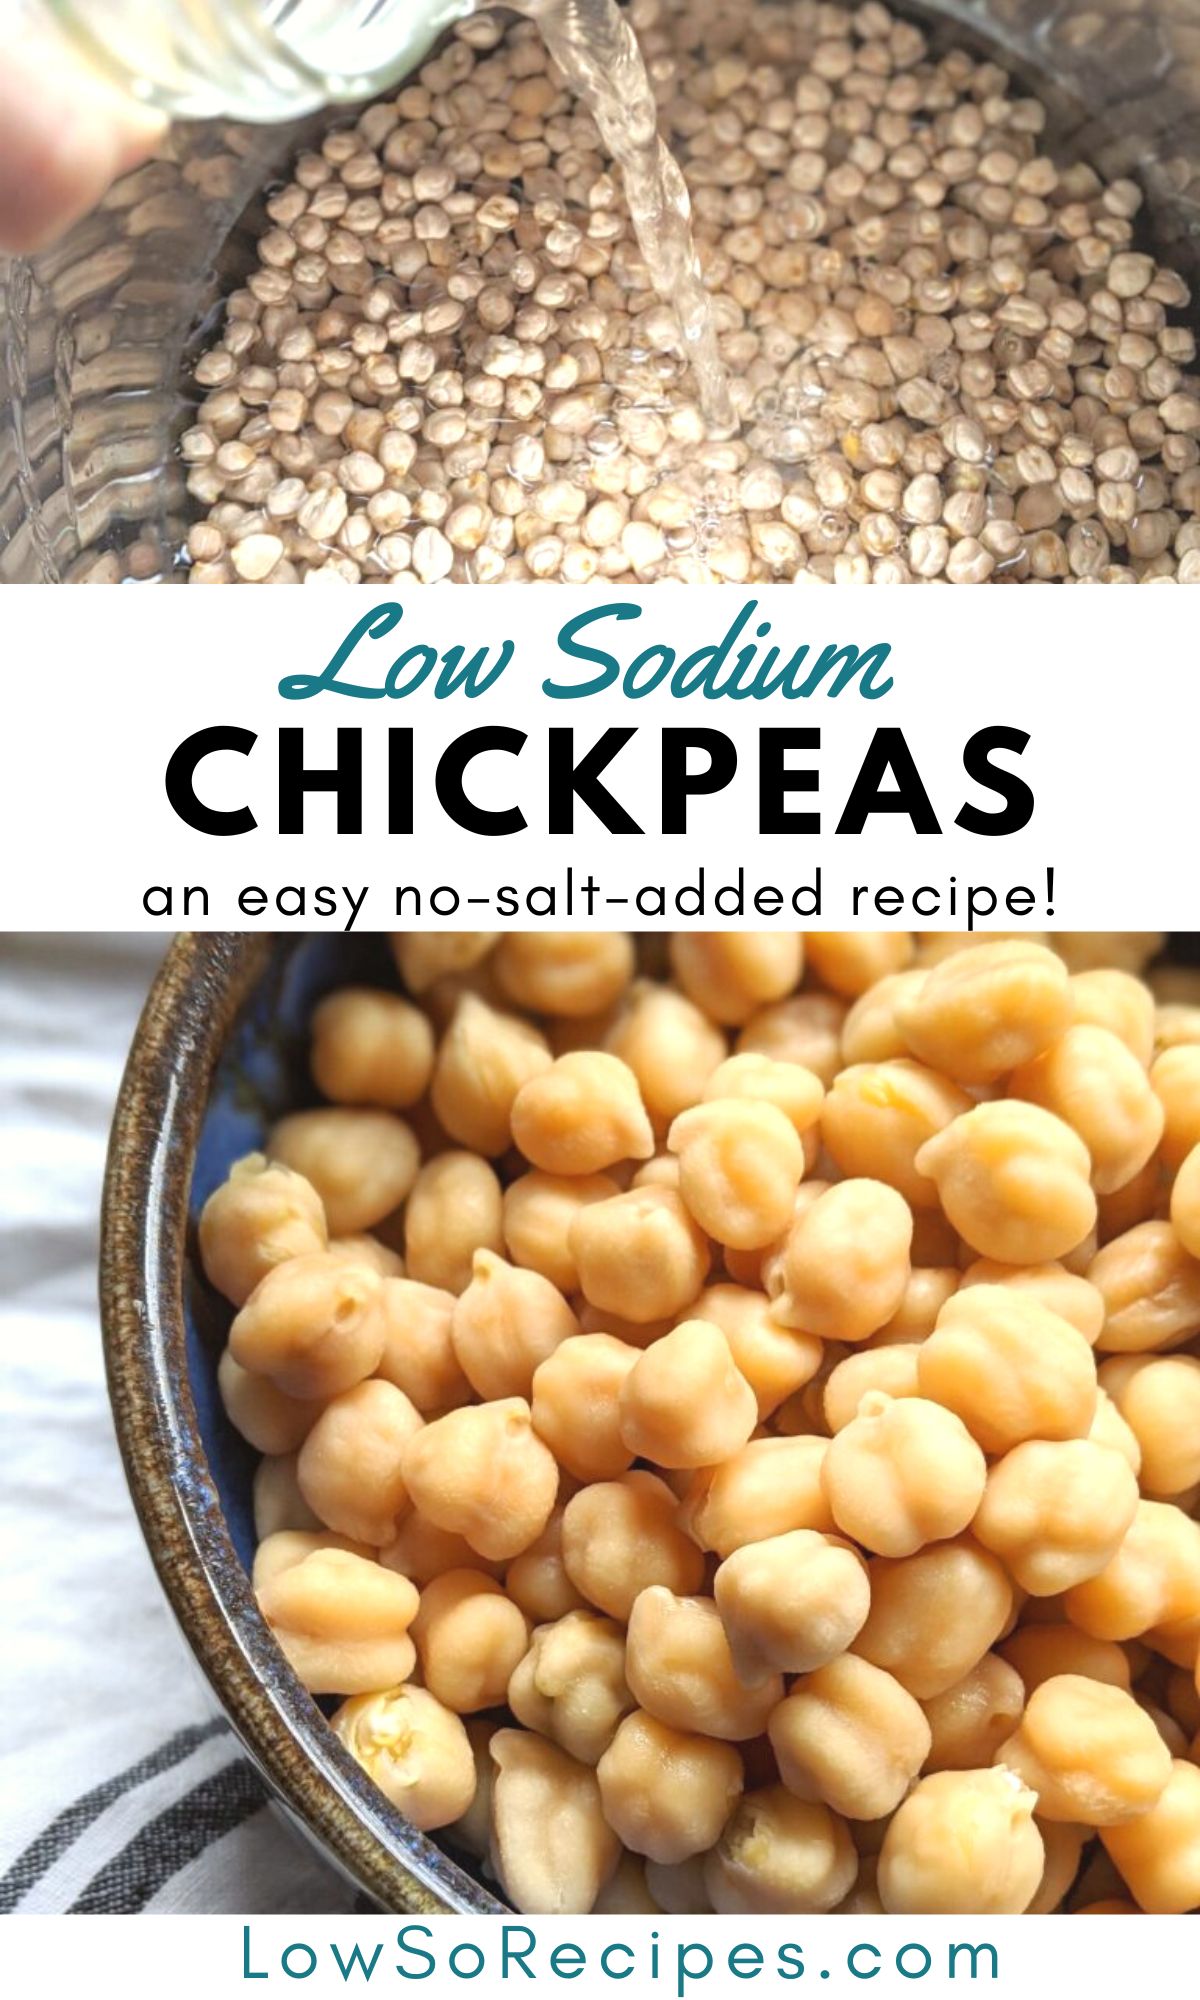 low sodium chickpeas recipe no salt added beans for lunch or dinner vegan vegetarian stove top or pressure cooker beans without salt